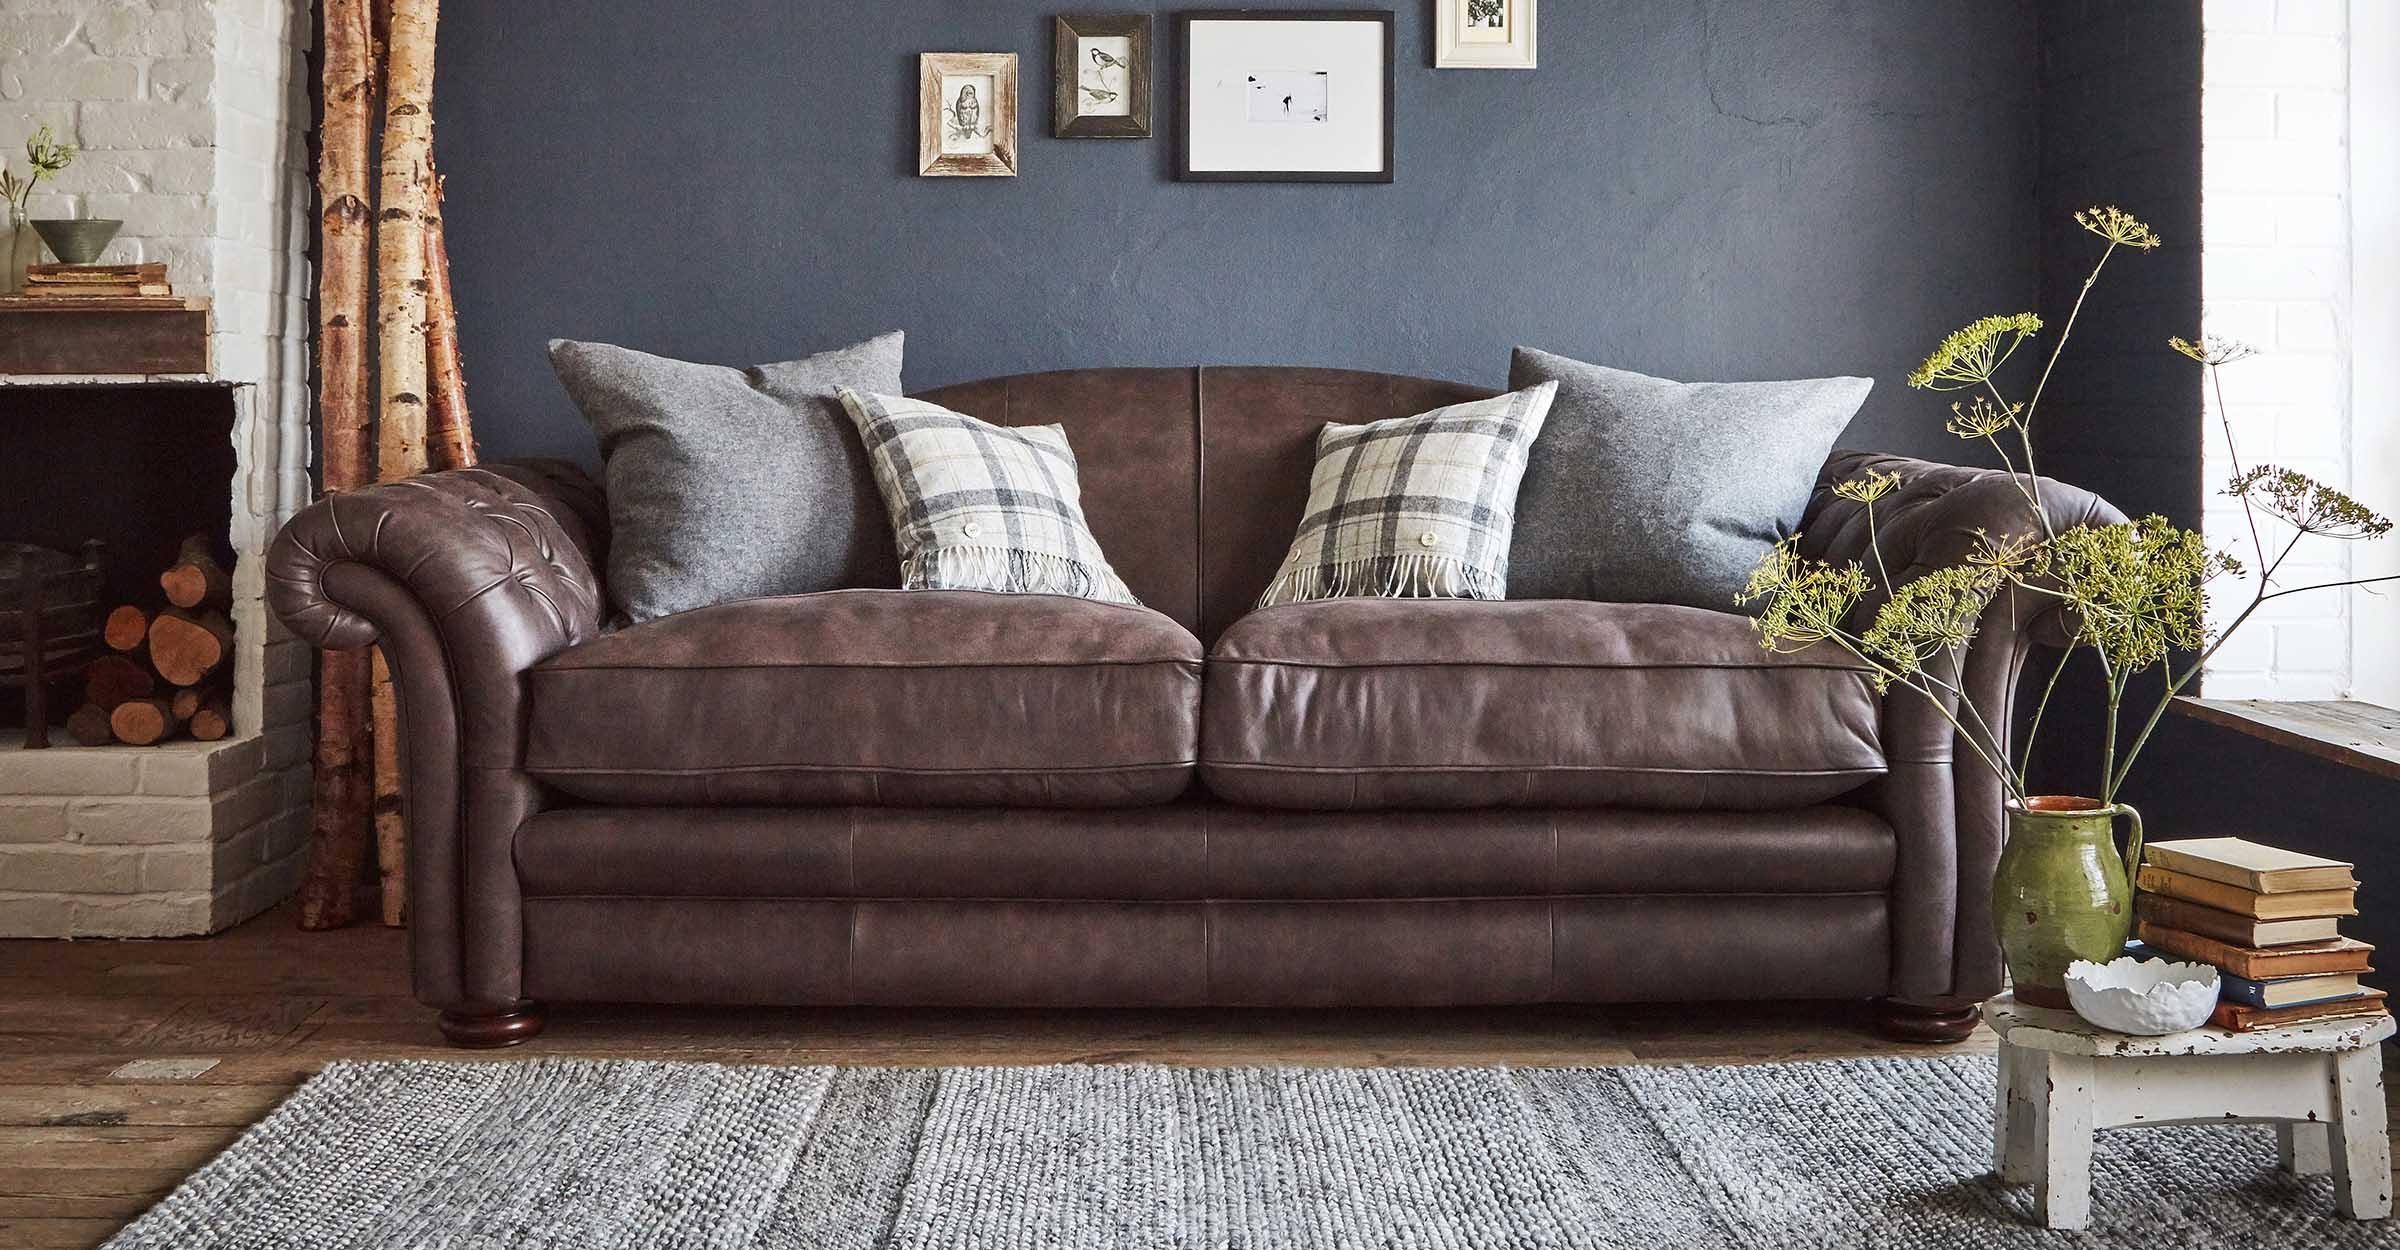 Brown Sofas Dfs, Wall Color With Brown Leather Furniture